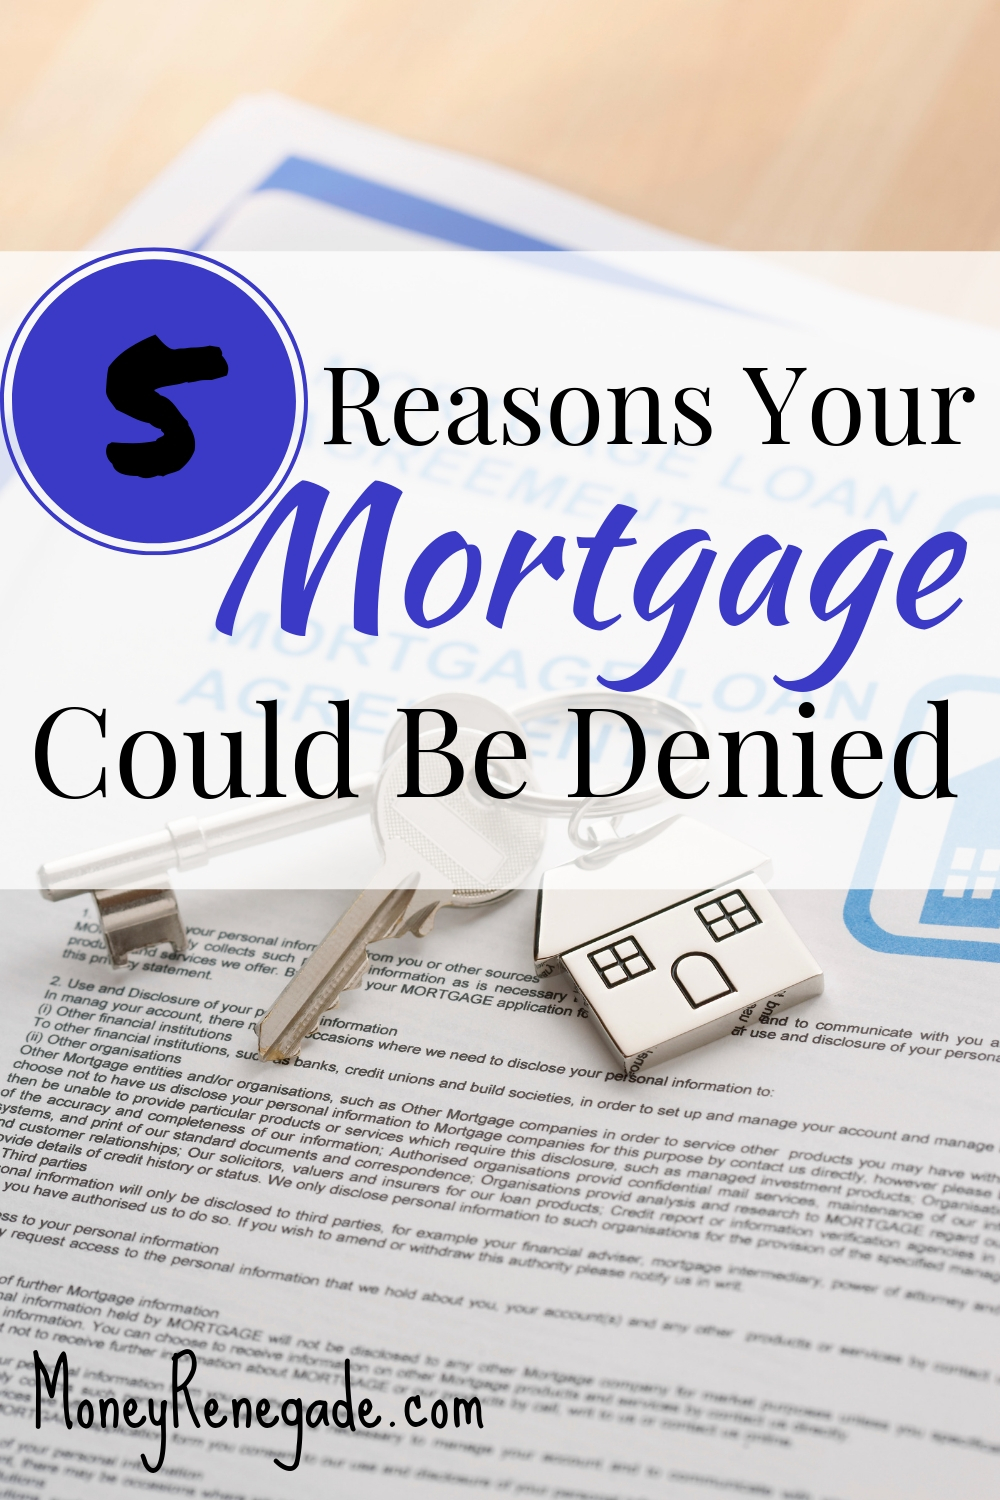 5 Reasons your mortgage could be denied